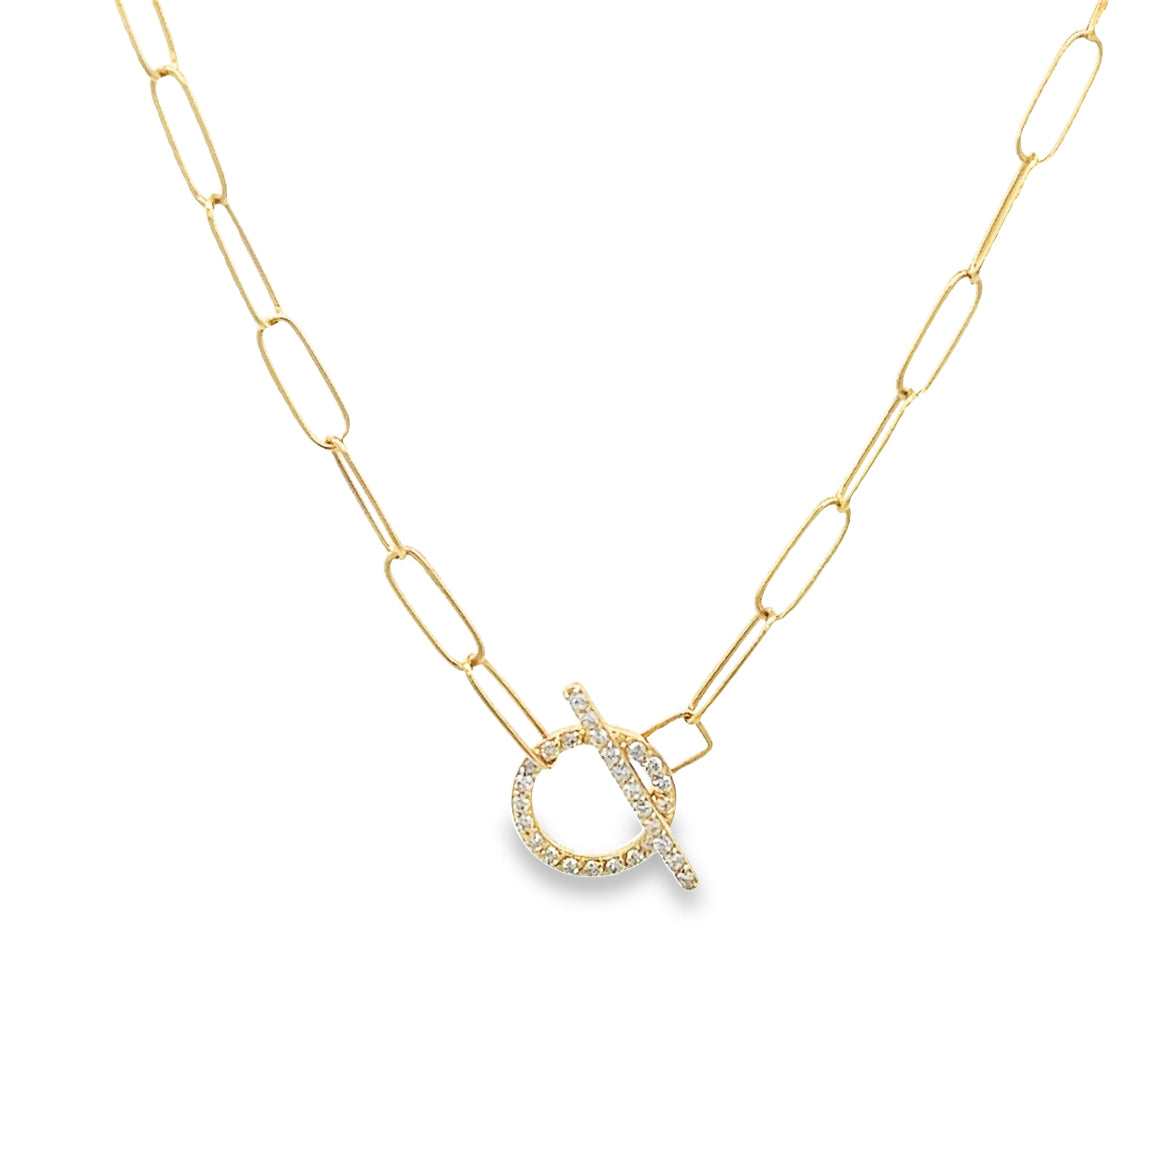 18K GOLD DIAMOND PAVE CIRCLE AND BAR PAPERCLIP NECKLACE